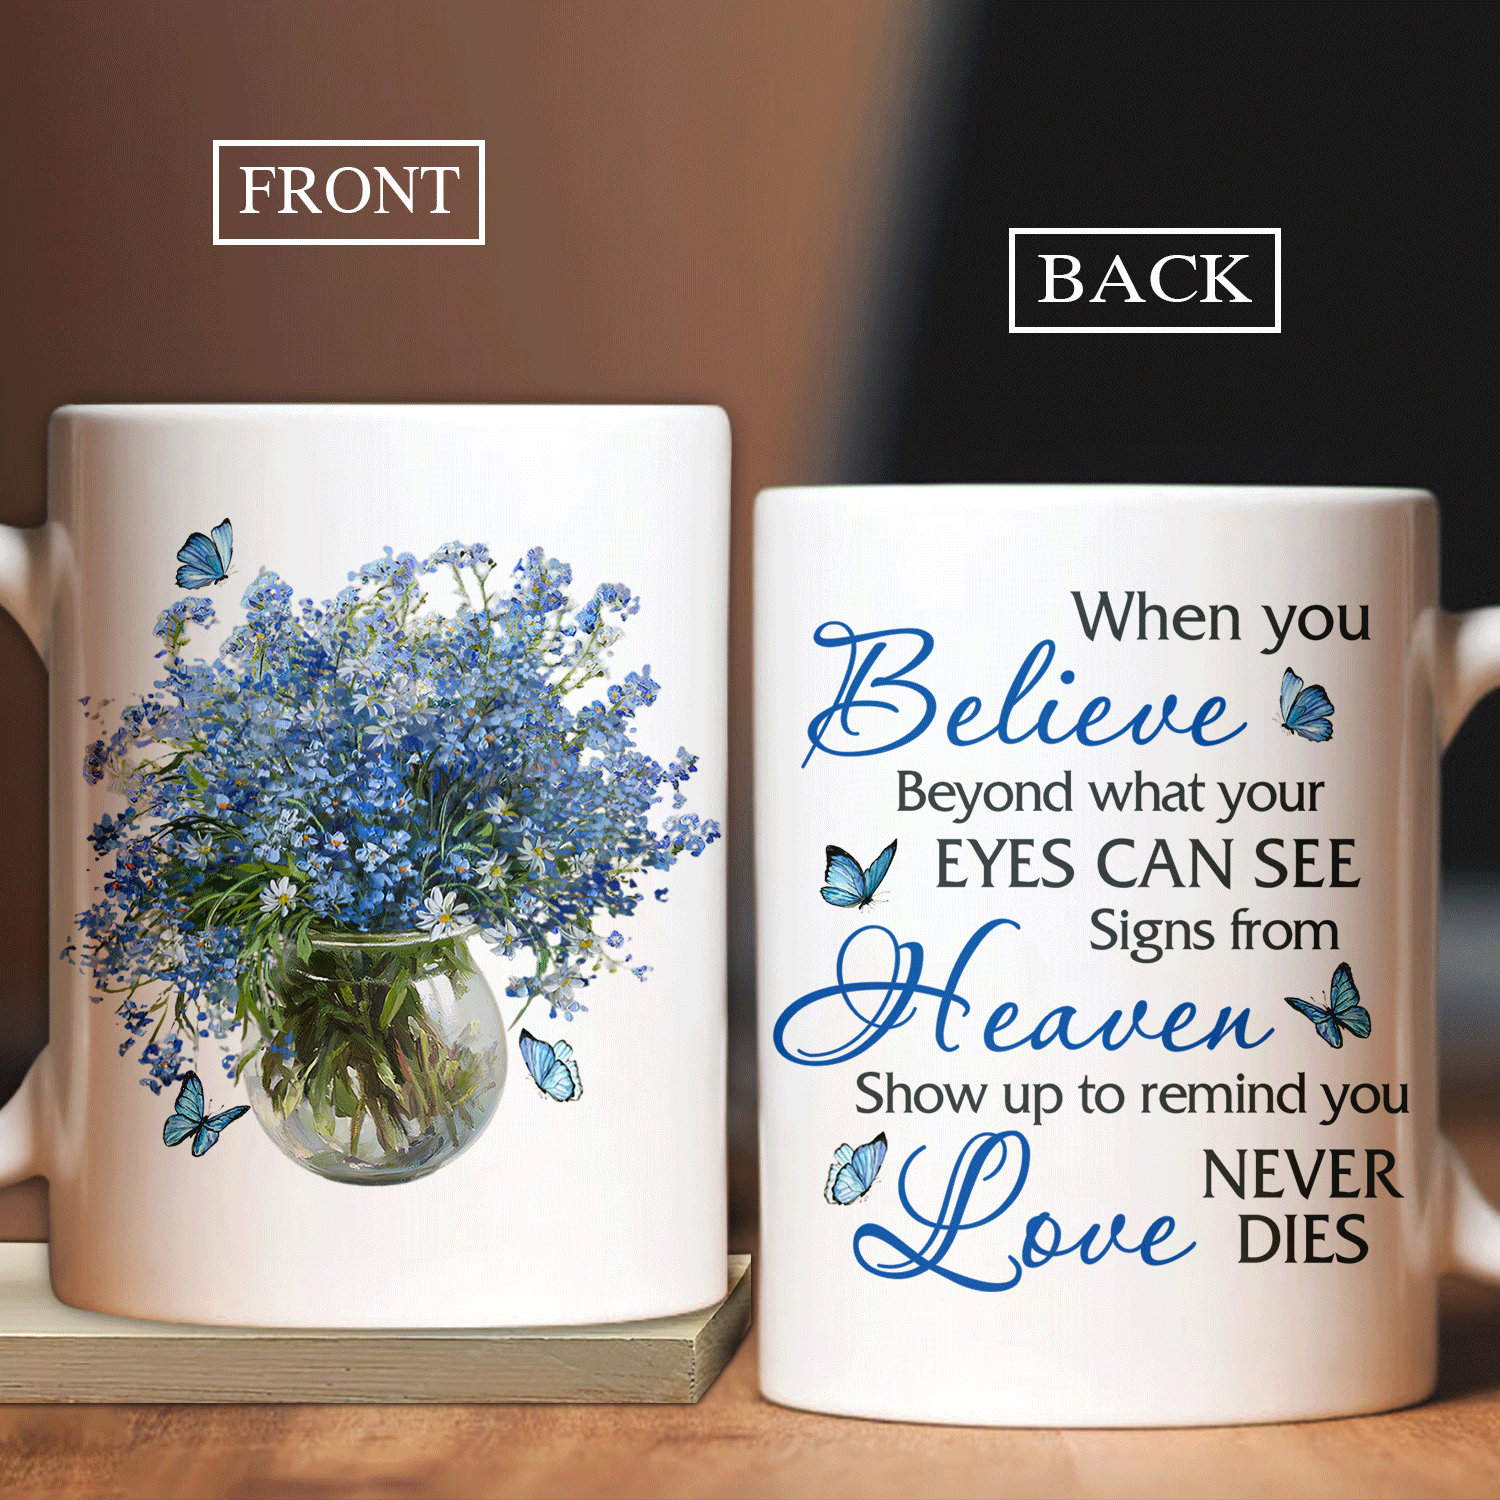 Memorial White Mug - Blue daisy, Butterfly painting- Gift For Member Family - Signs from heaven show up to remind love never dies - Heaven White Mug